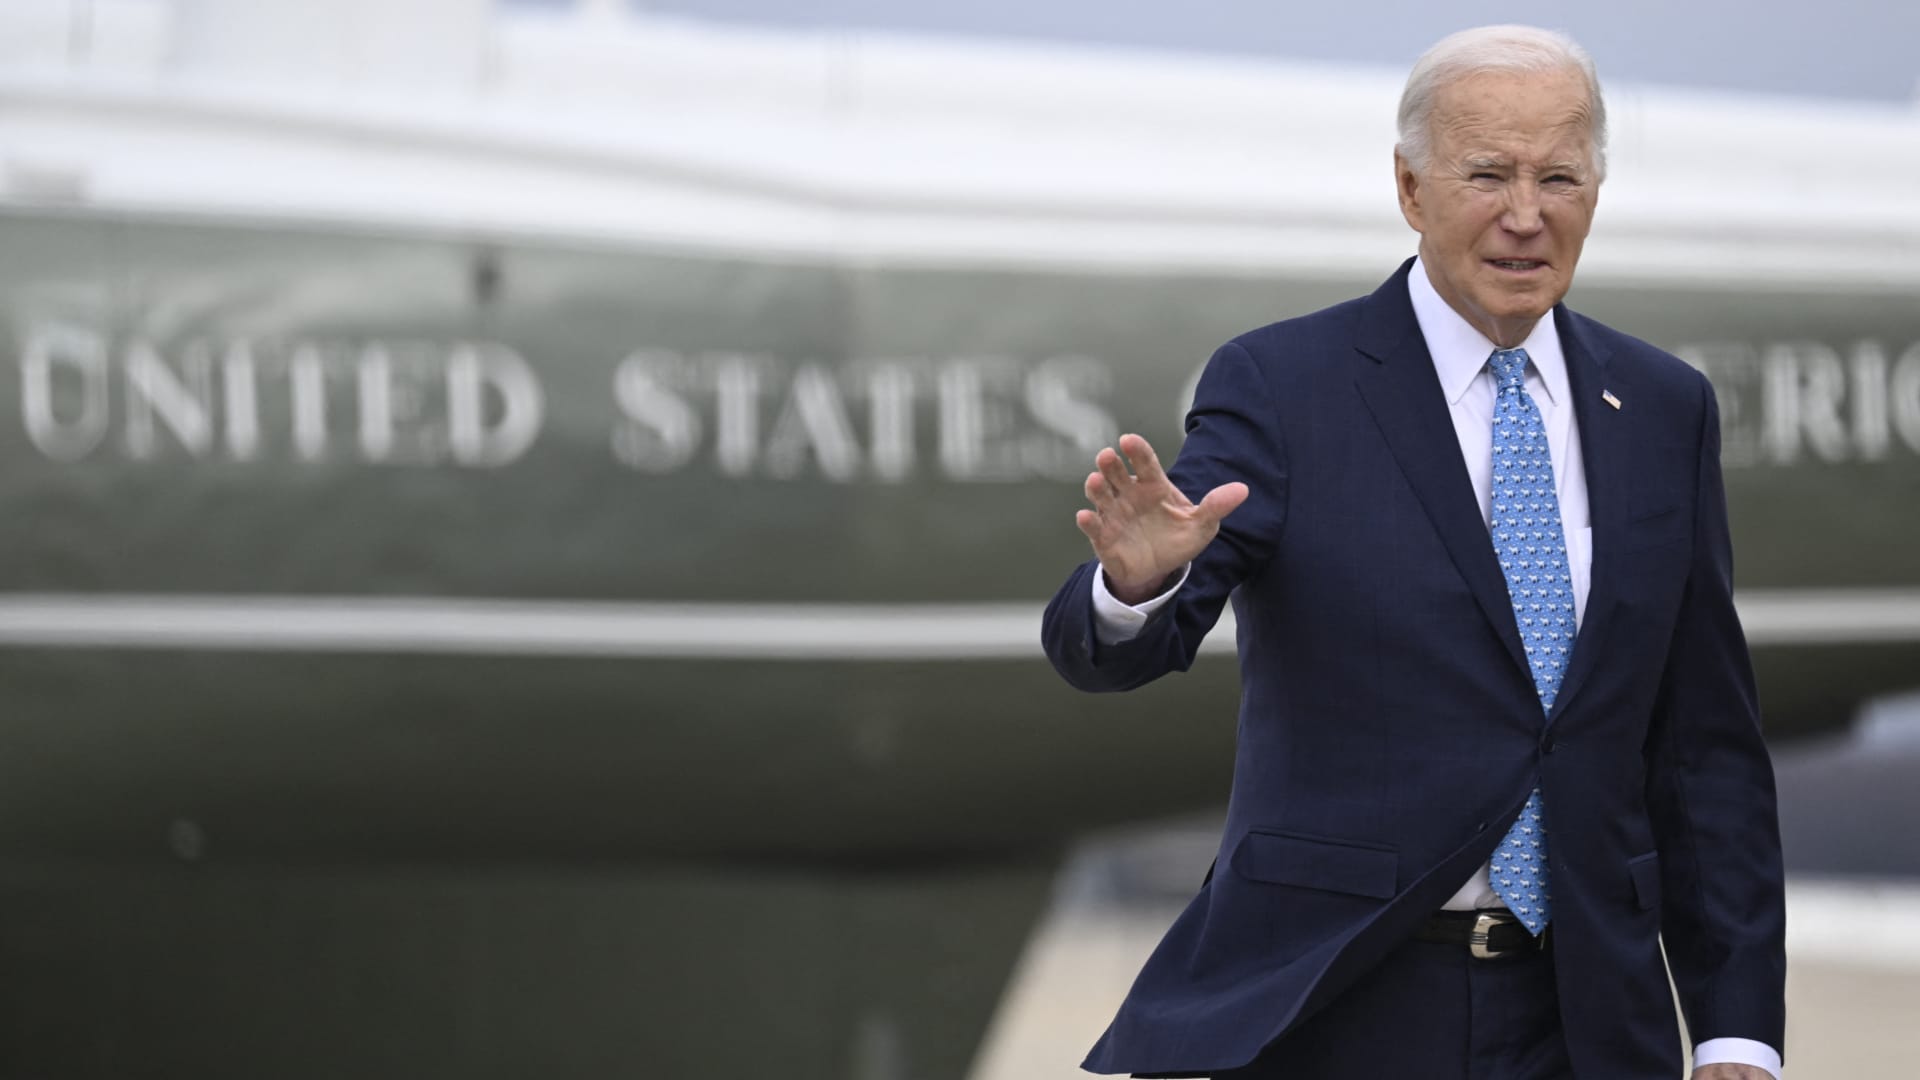 No criminal charges expected in Biden classified documents probe: NBC